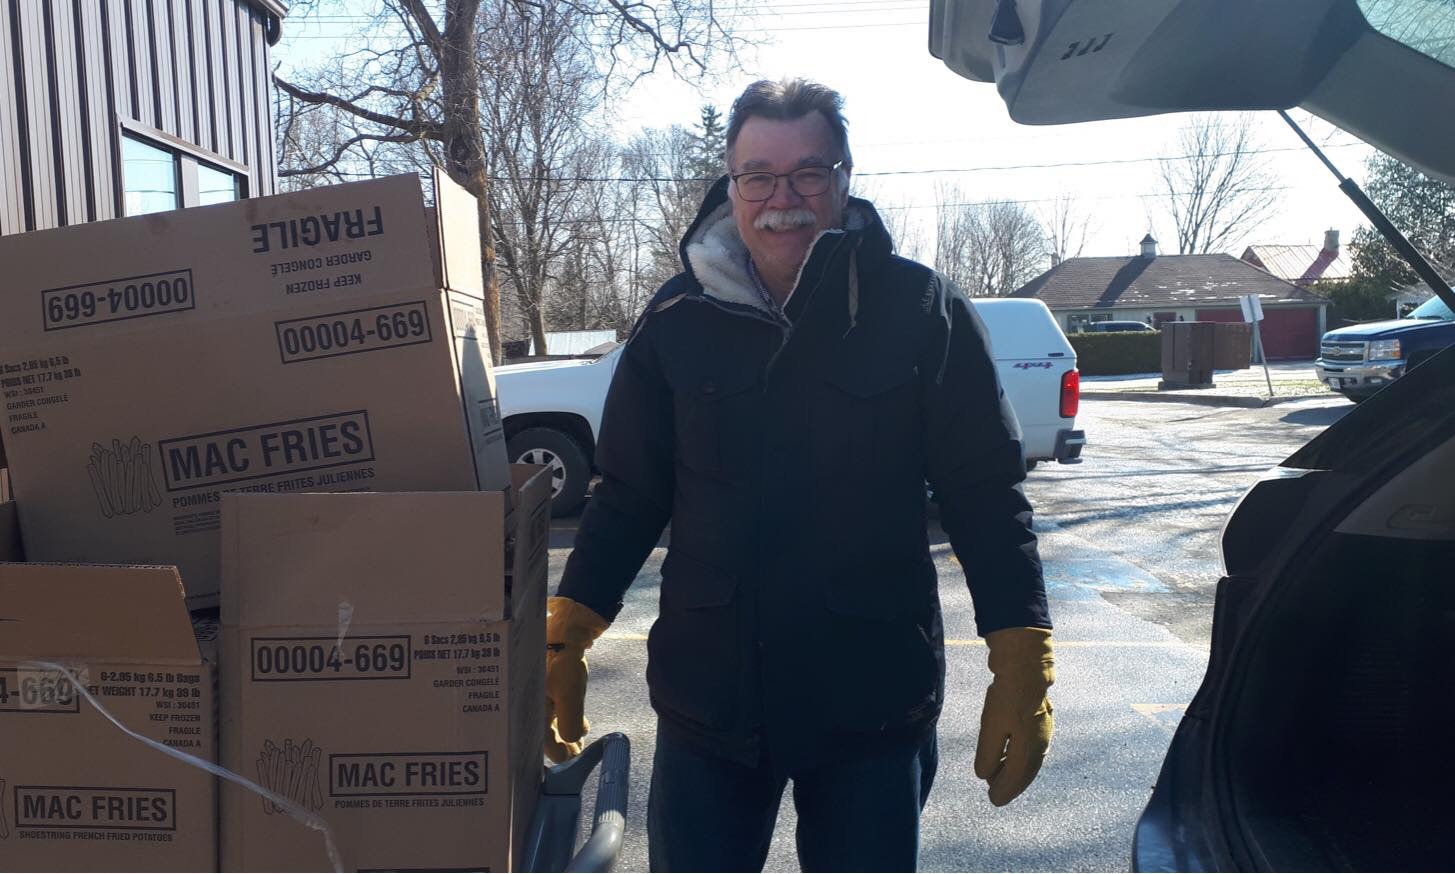 Mike Taylor wearing a winter coat standing outside beside a stack of boxes